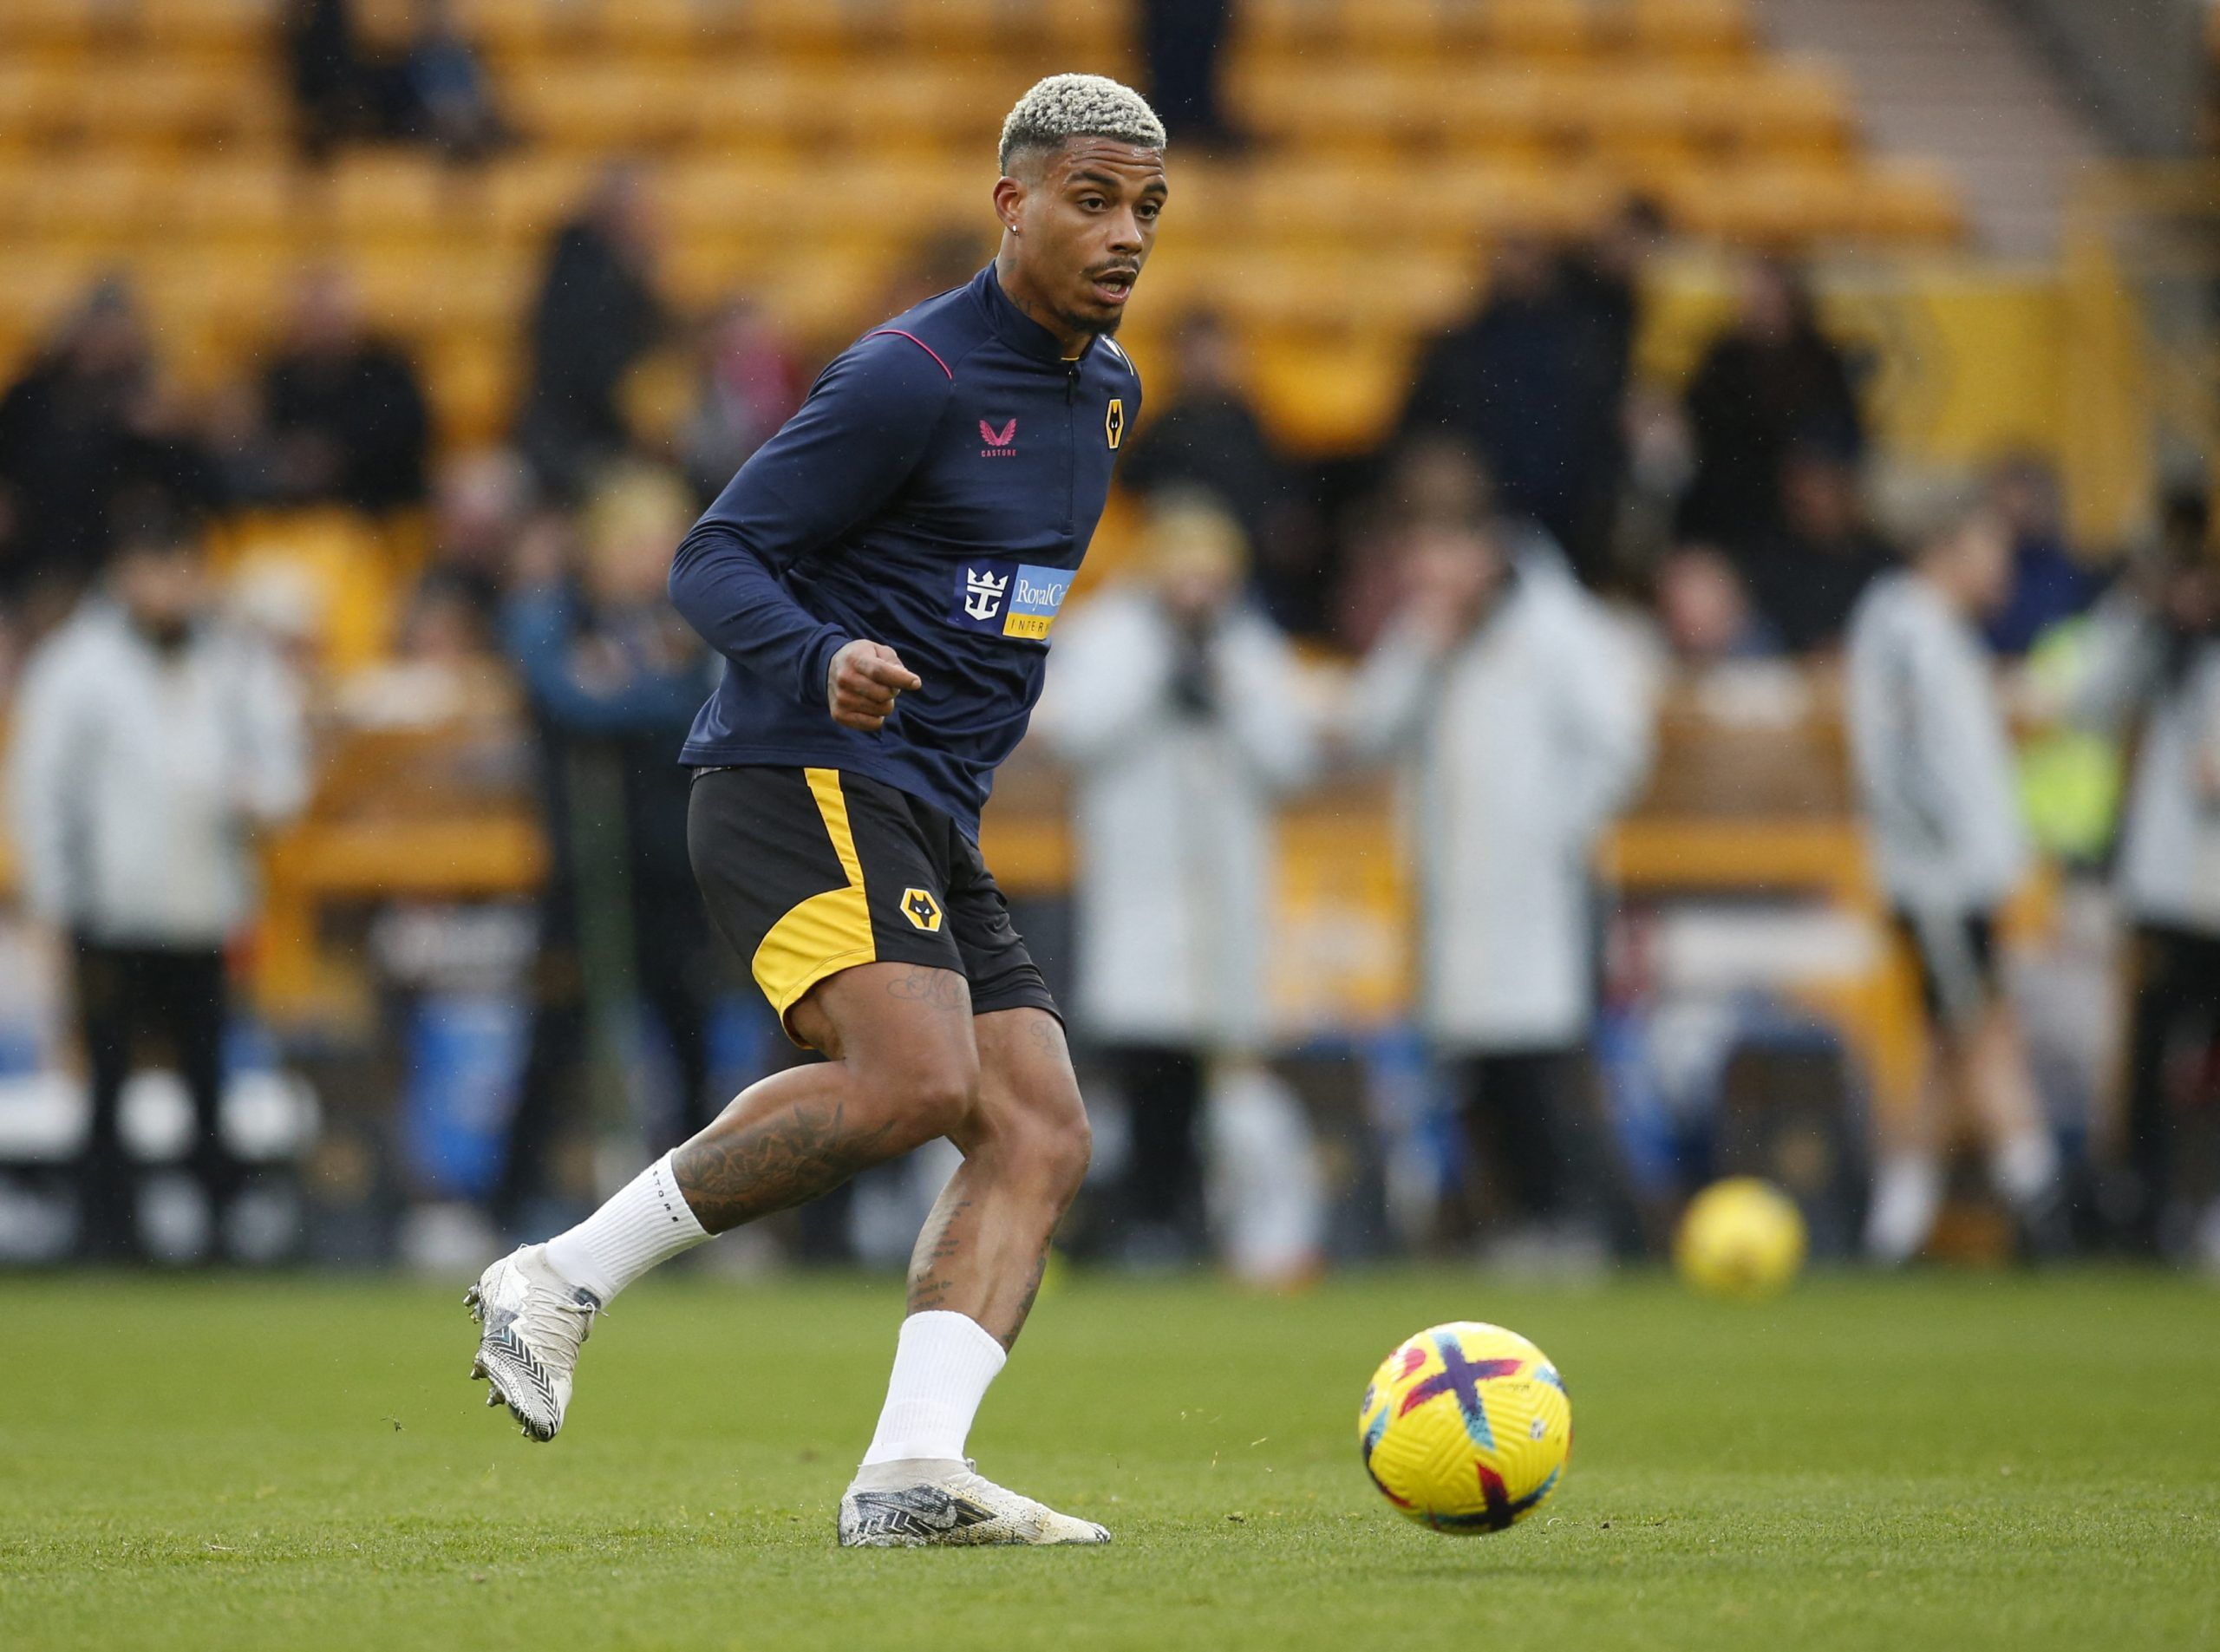 Soccer Football - Premier League - Wolverhampton Wanderers v Liverpool - Molineux Stadium, Wolverhampton, Britain - February 4, 2023 Wolverhampton Wanderers' Mario Lemina during the warm up before the match Action Images via Reuters/Ed Sykes EDITORIAL USE ONLY. No use with unauthorized audio, video, data, fixture lists, club/league logos or 'live' services. Online in-match use limited to 75 images, no video emulation. No use in betting, games or single club /league/player publications.  Please c